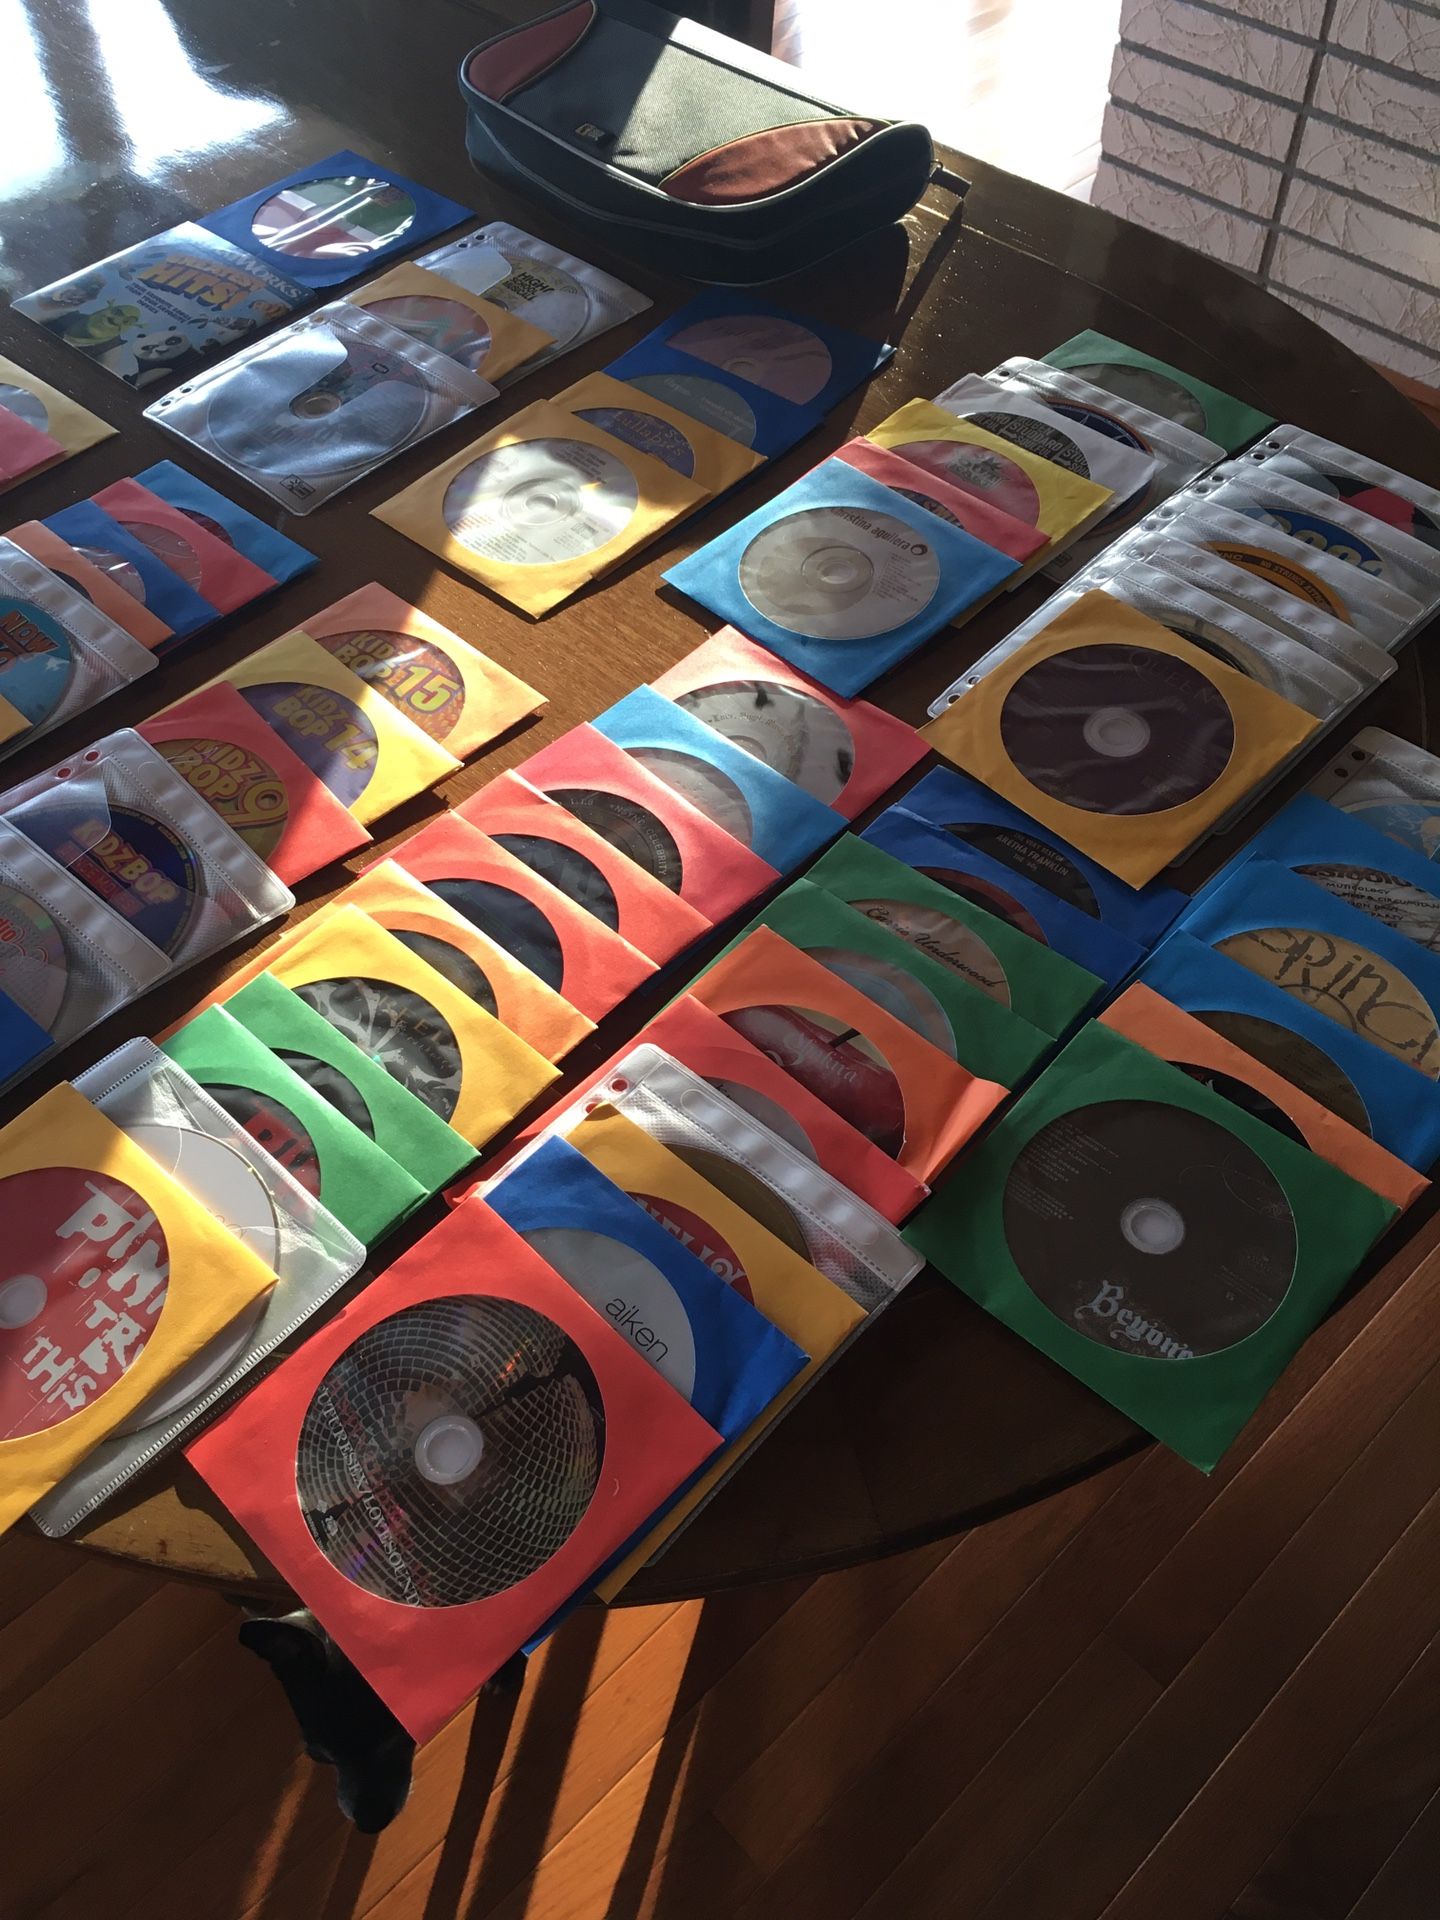 ASSORTMENT OF 67 MUSICAL CD’S WITH A CARRYING CASE FOR YOUR FAVORITES...